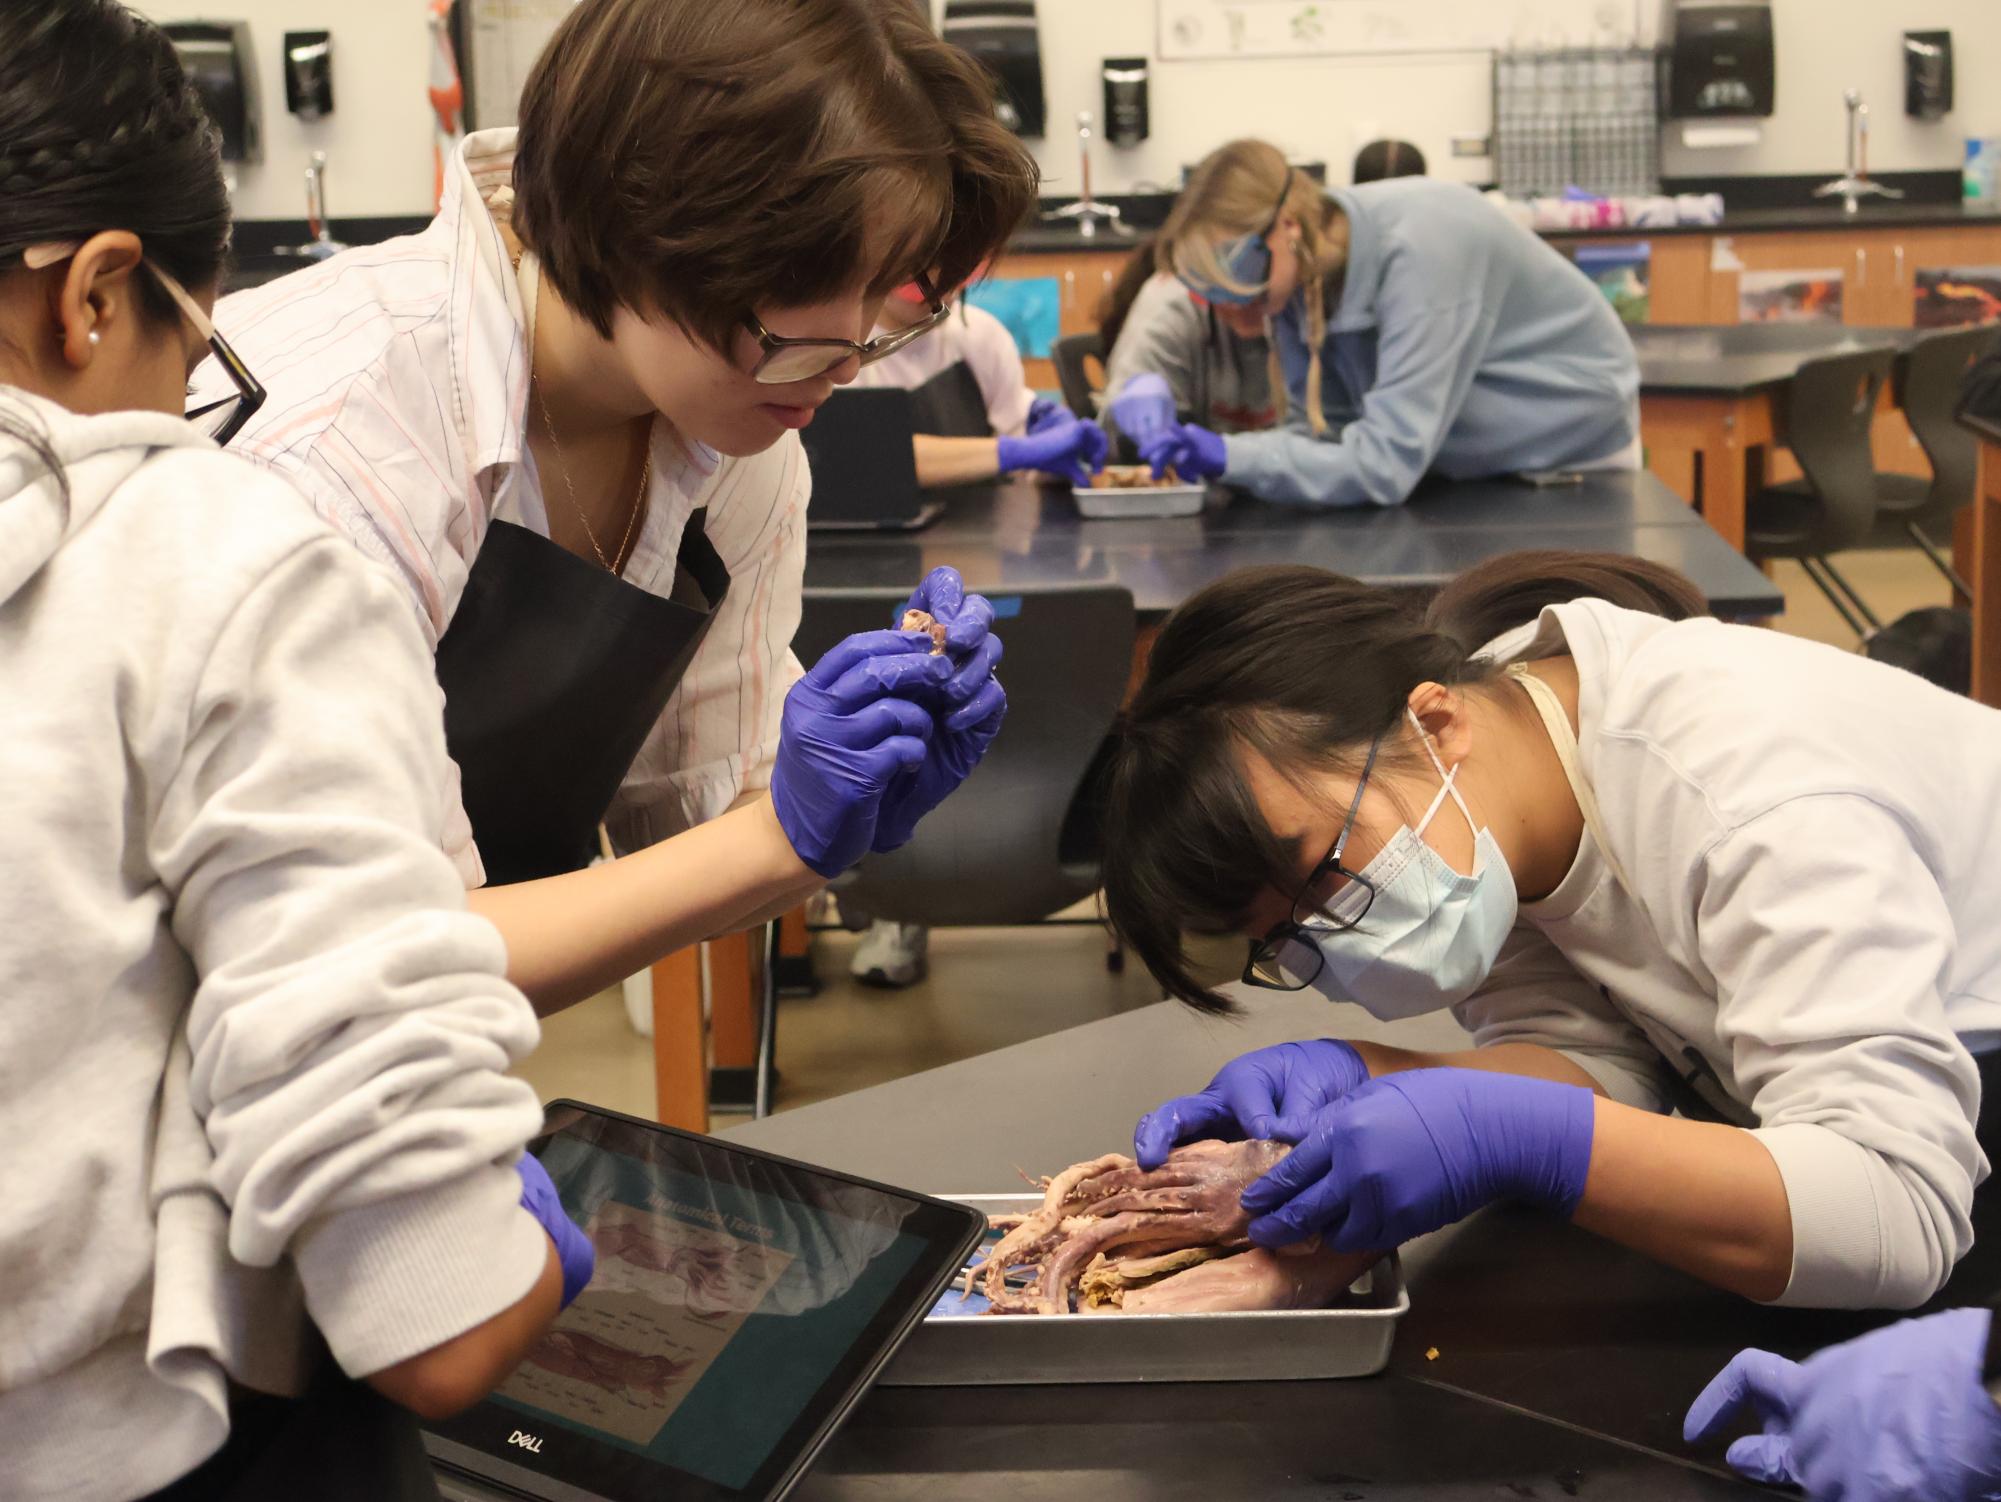 Anatomy+%26+Dissection+Club+Gets+Their+Hands+Inky+for+Squid+Dissection